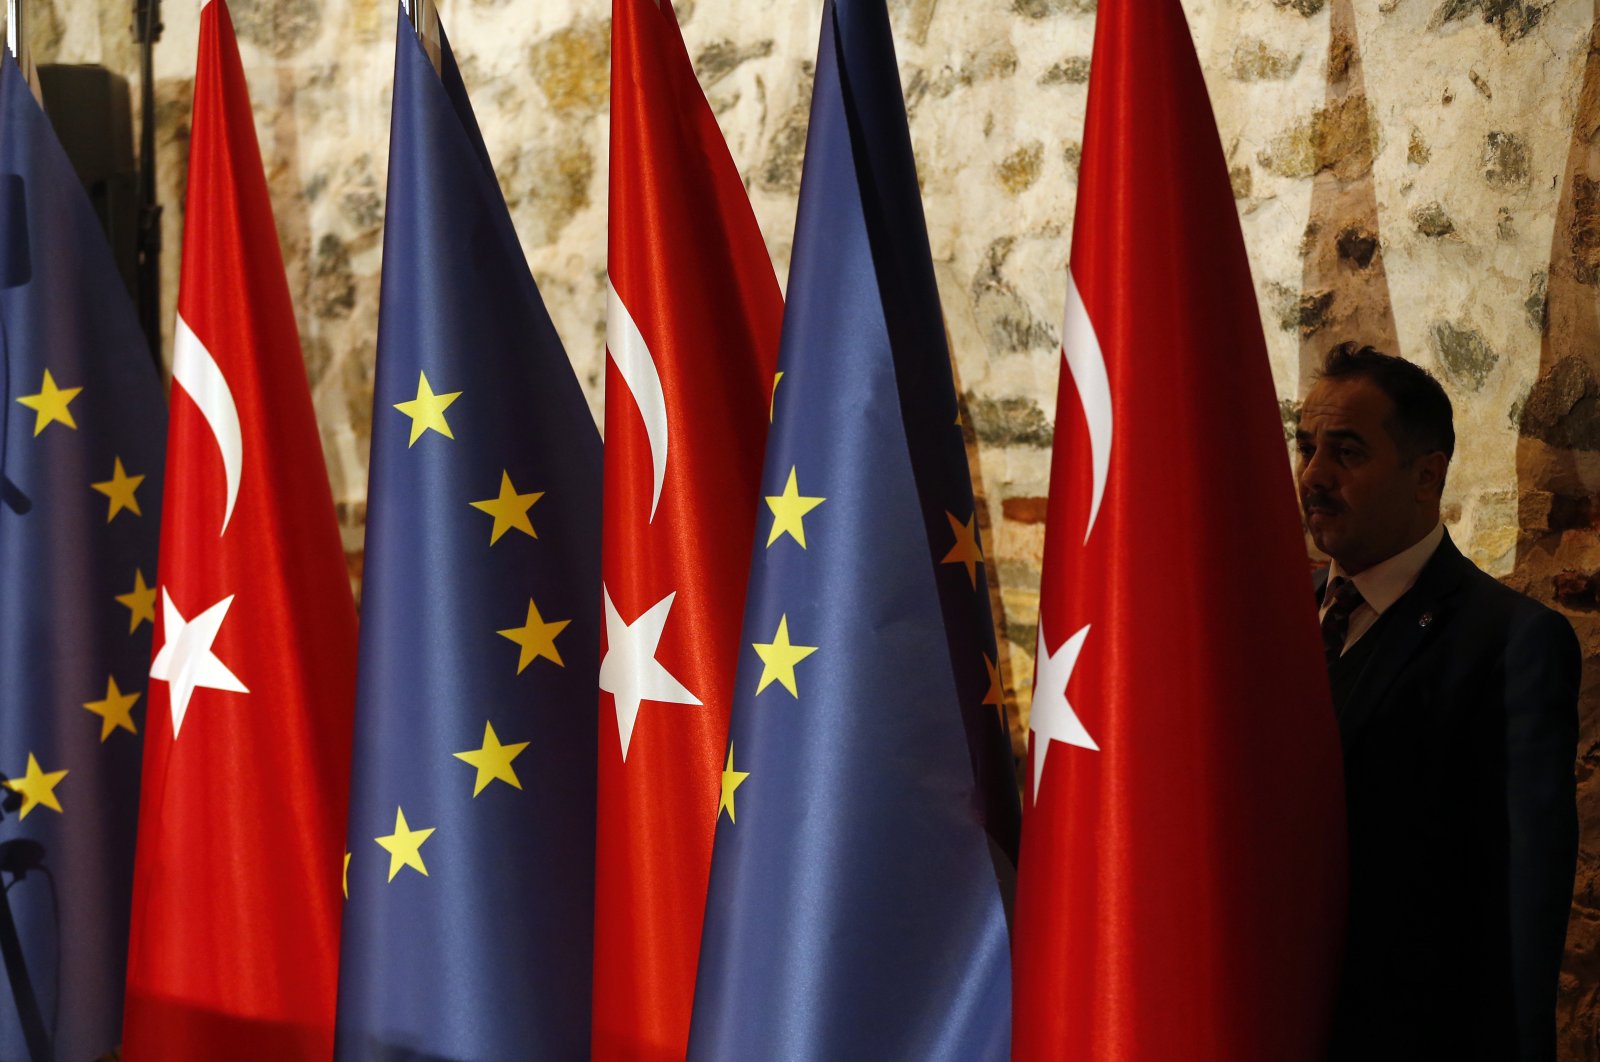 An official adjusts Turkey's and the European Union flags prior to the opening session of a high-level meeting between EU and Turkey, Istanbul, Feb. 28, 2019. (AP Photo)